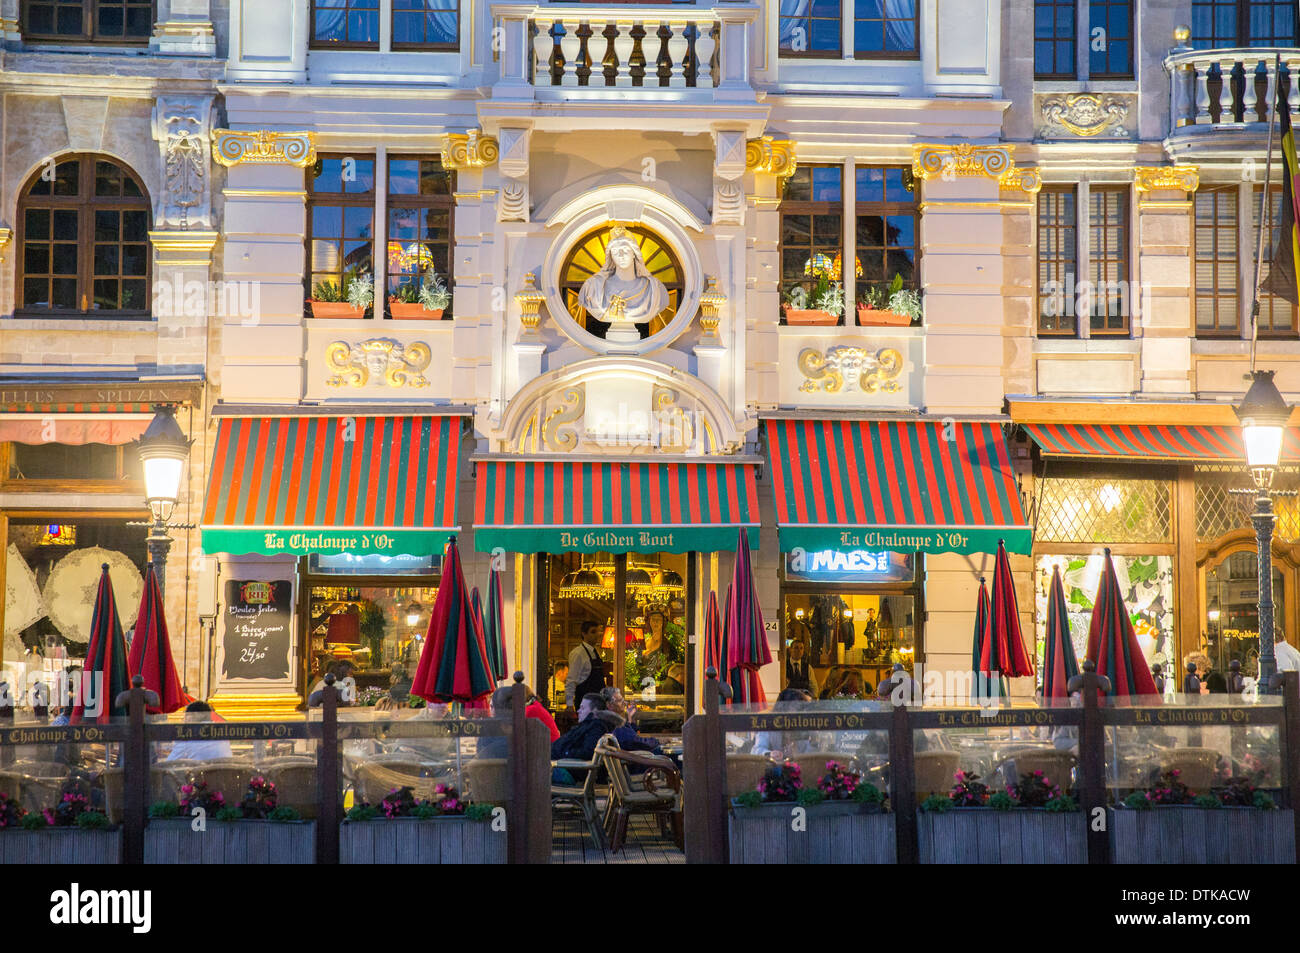 La Chaloupe D'Or - The Golden Boot restaurant in Grote Markt (The Grand Place) in central Brussels at night Stock Photo